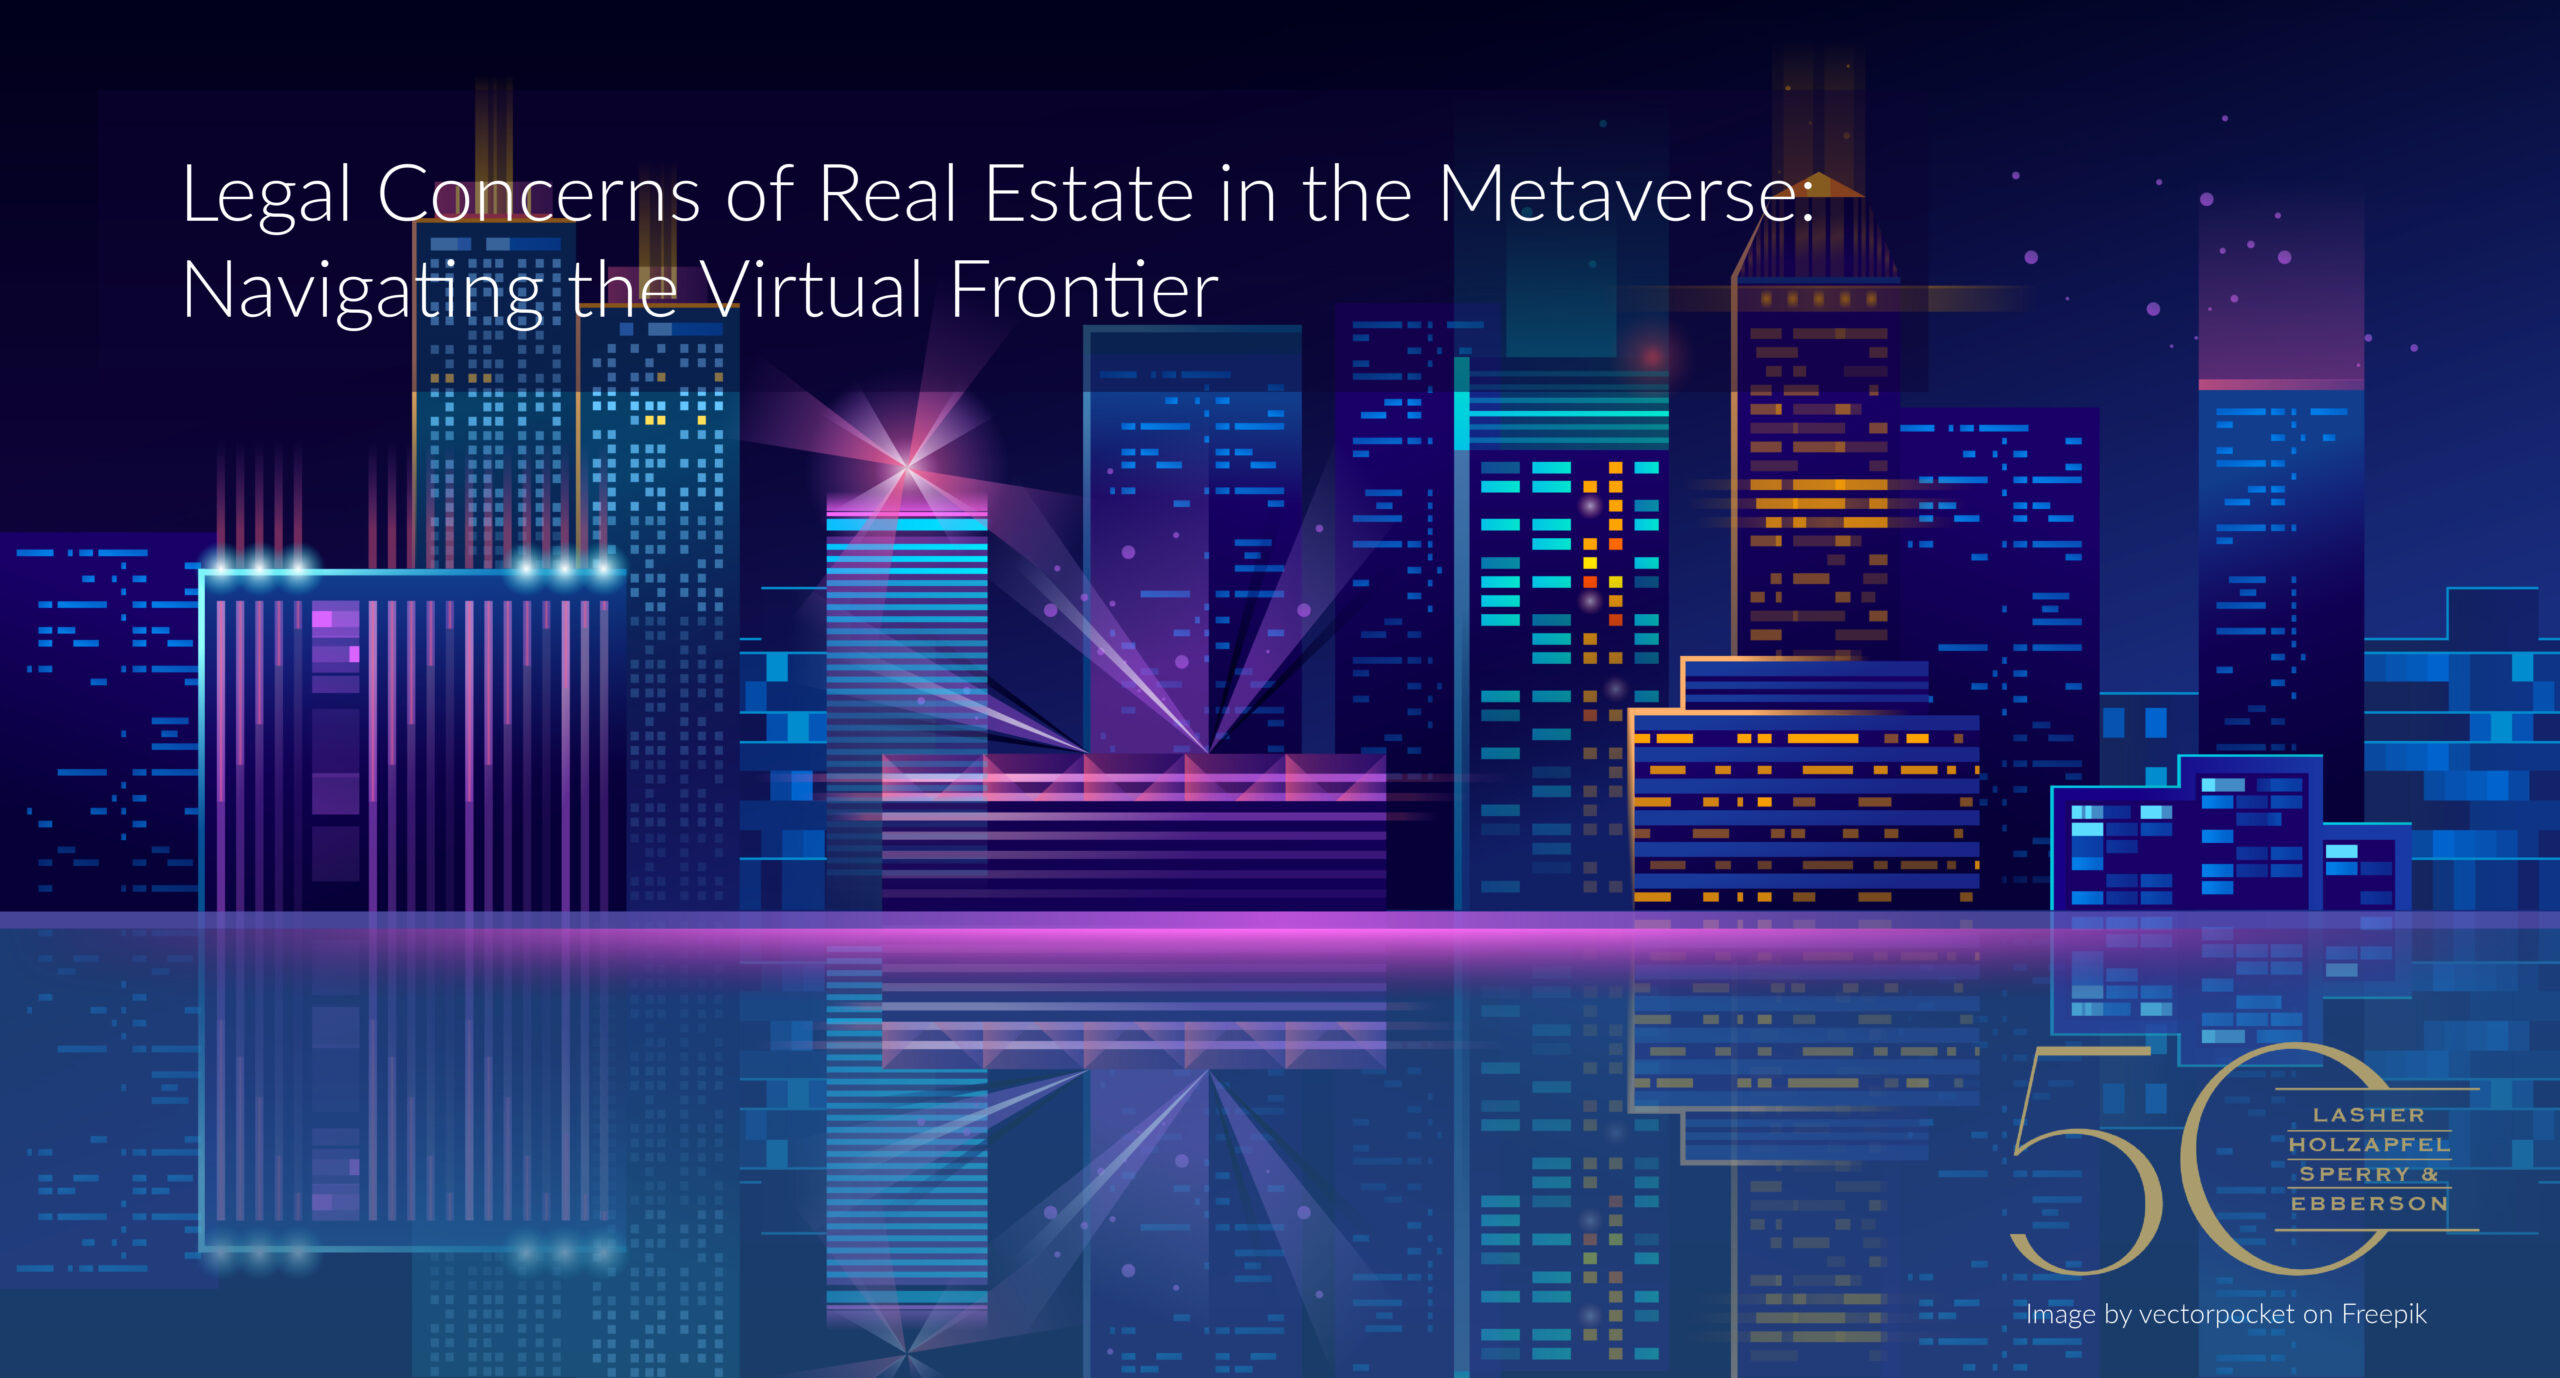 Legal Concerns of Real Estate in the Metaverse: Navigating the Virtual Frontier